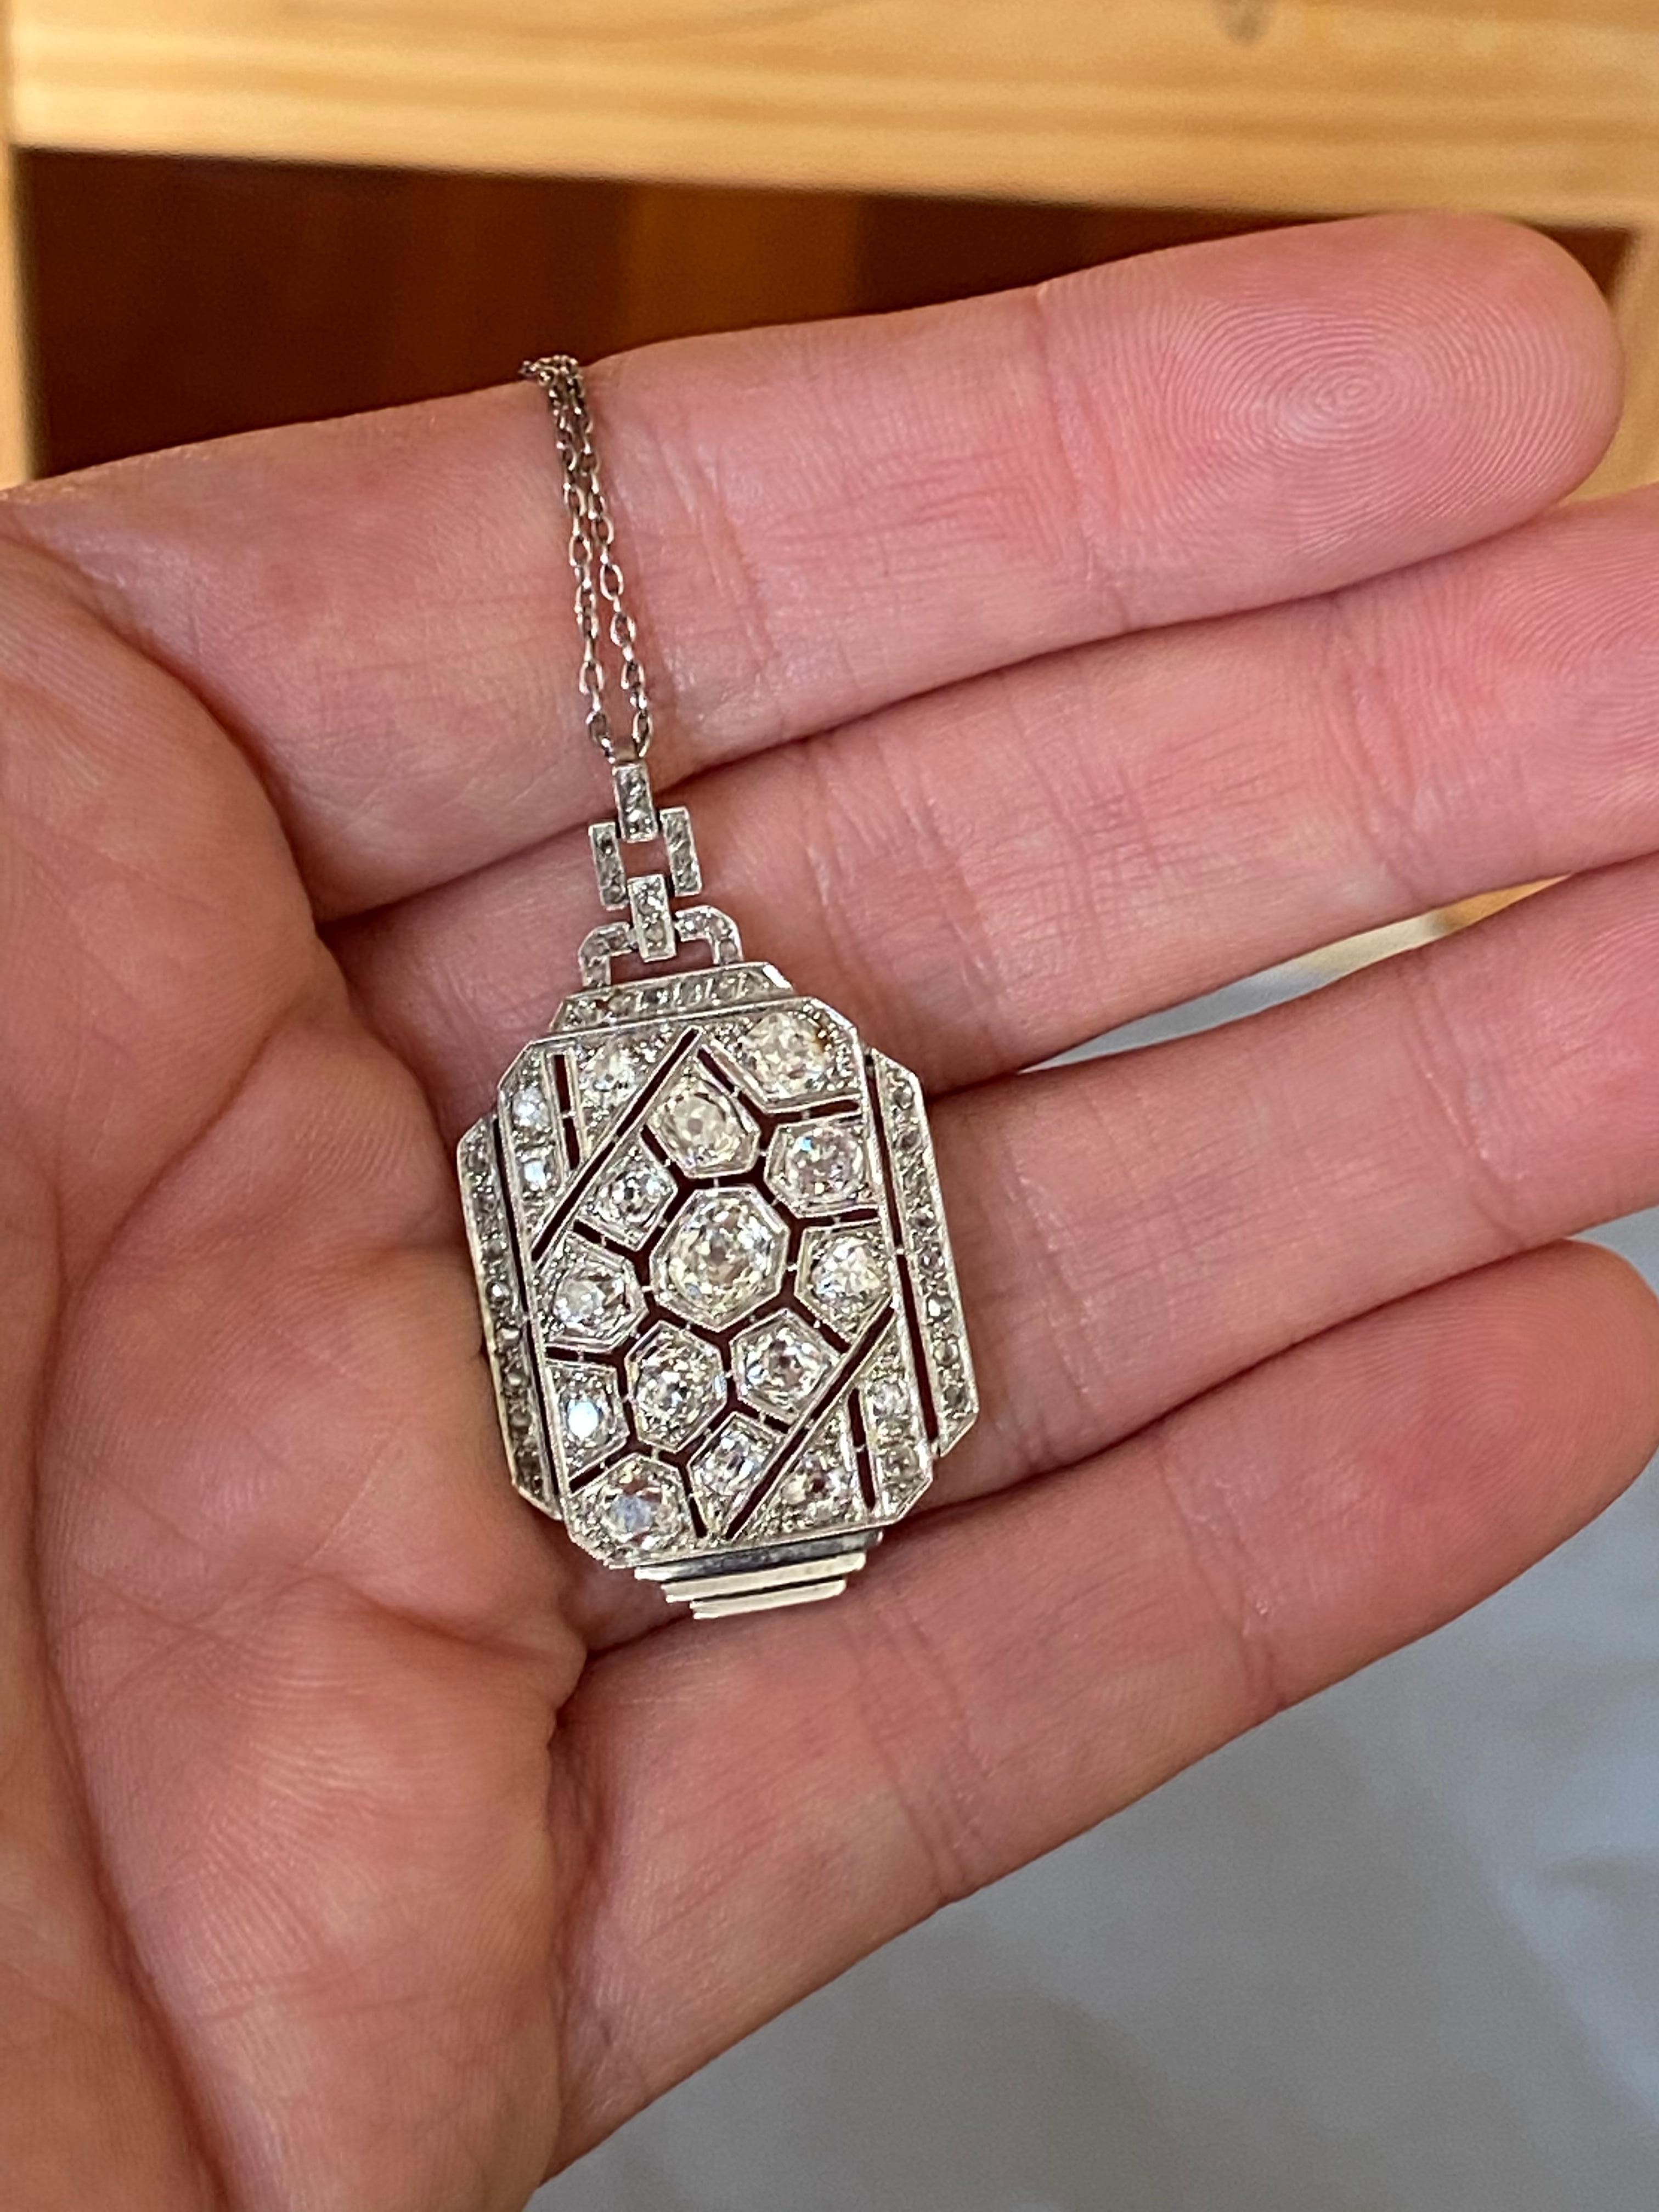 Very beautiful pendant necklace, made in France circa 1930.
The chain is made in platinum 950 and the pendant is in white gold 18k.
The chain measures 46 cm (18.4 inches), you can also wear 41 (16.4 inches) cm or 35 cm. 
The pendant measures 42 mm